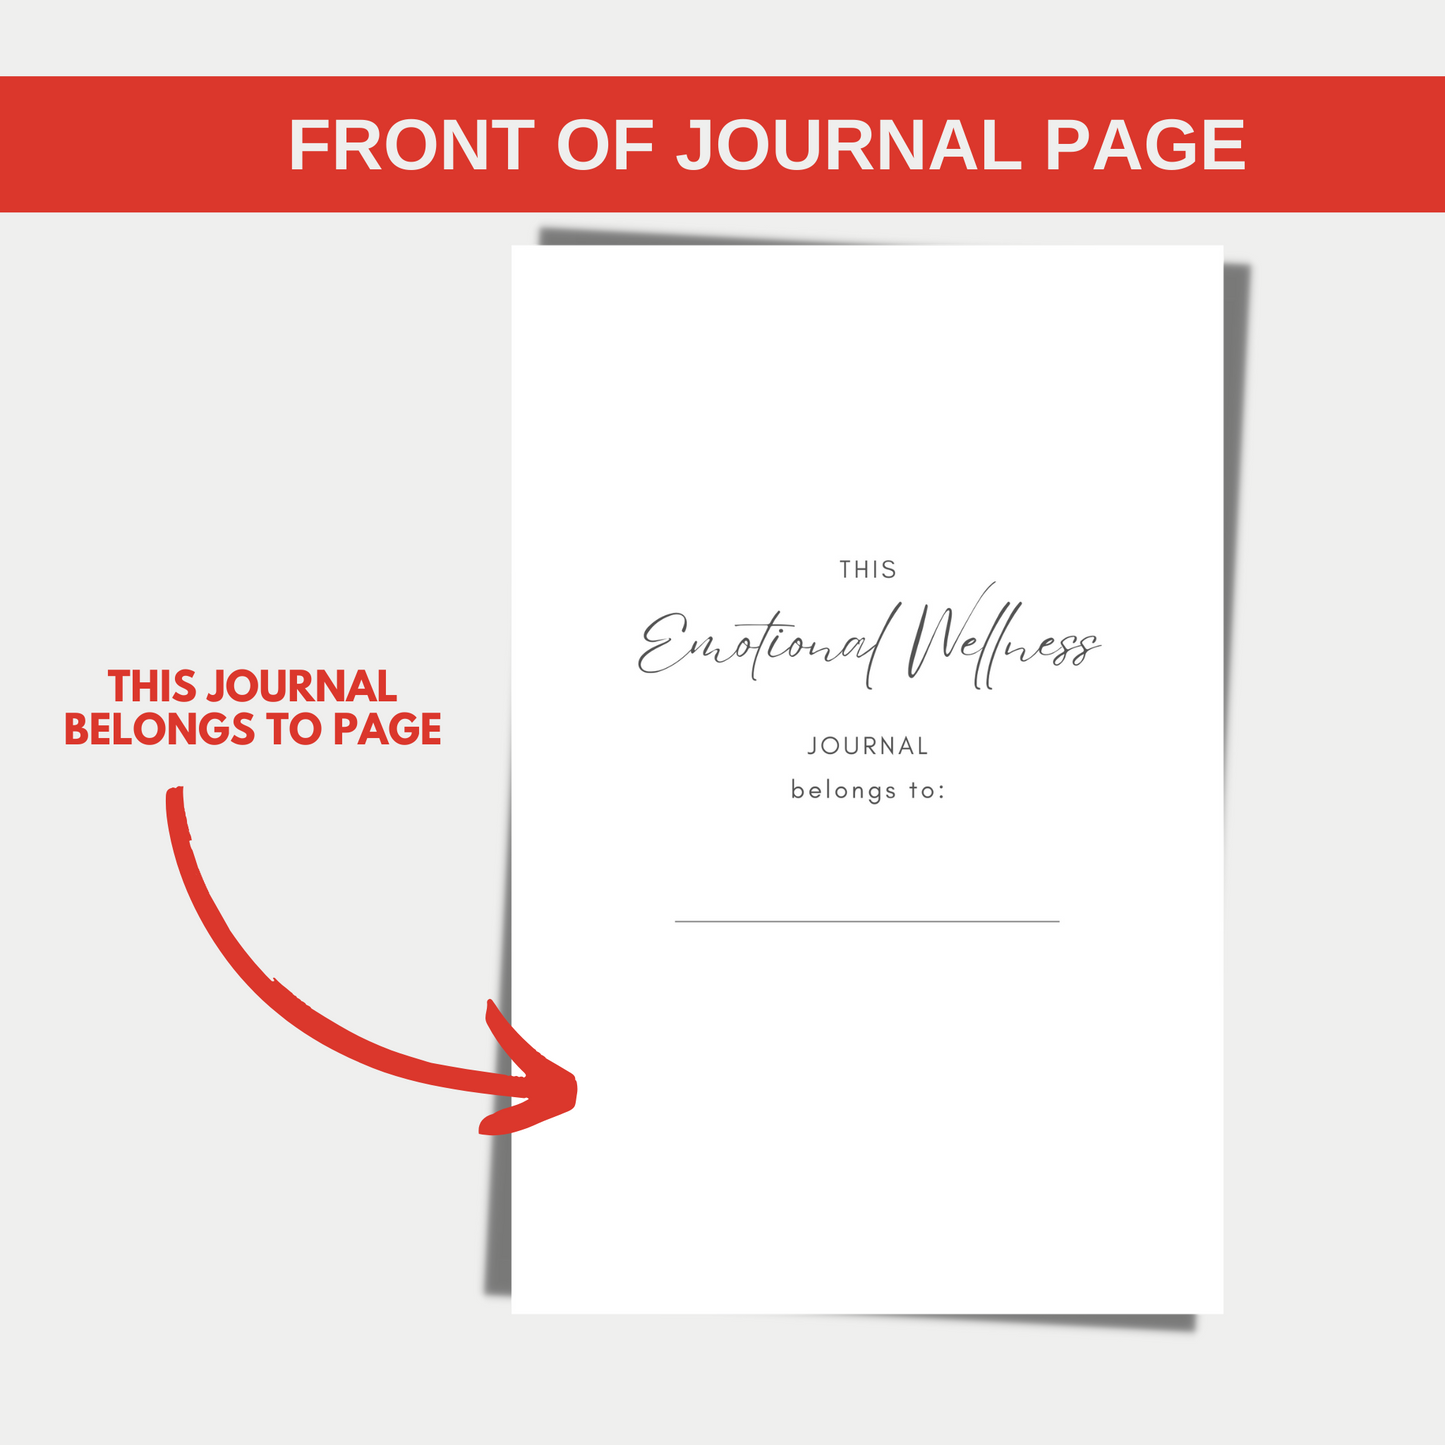 Elevate Your Energy Emotional Wellness Journal for KDP (Amazon) and The Book Patch